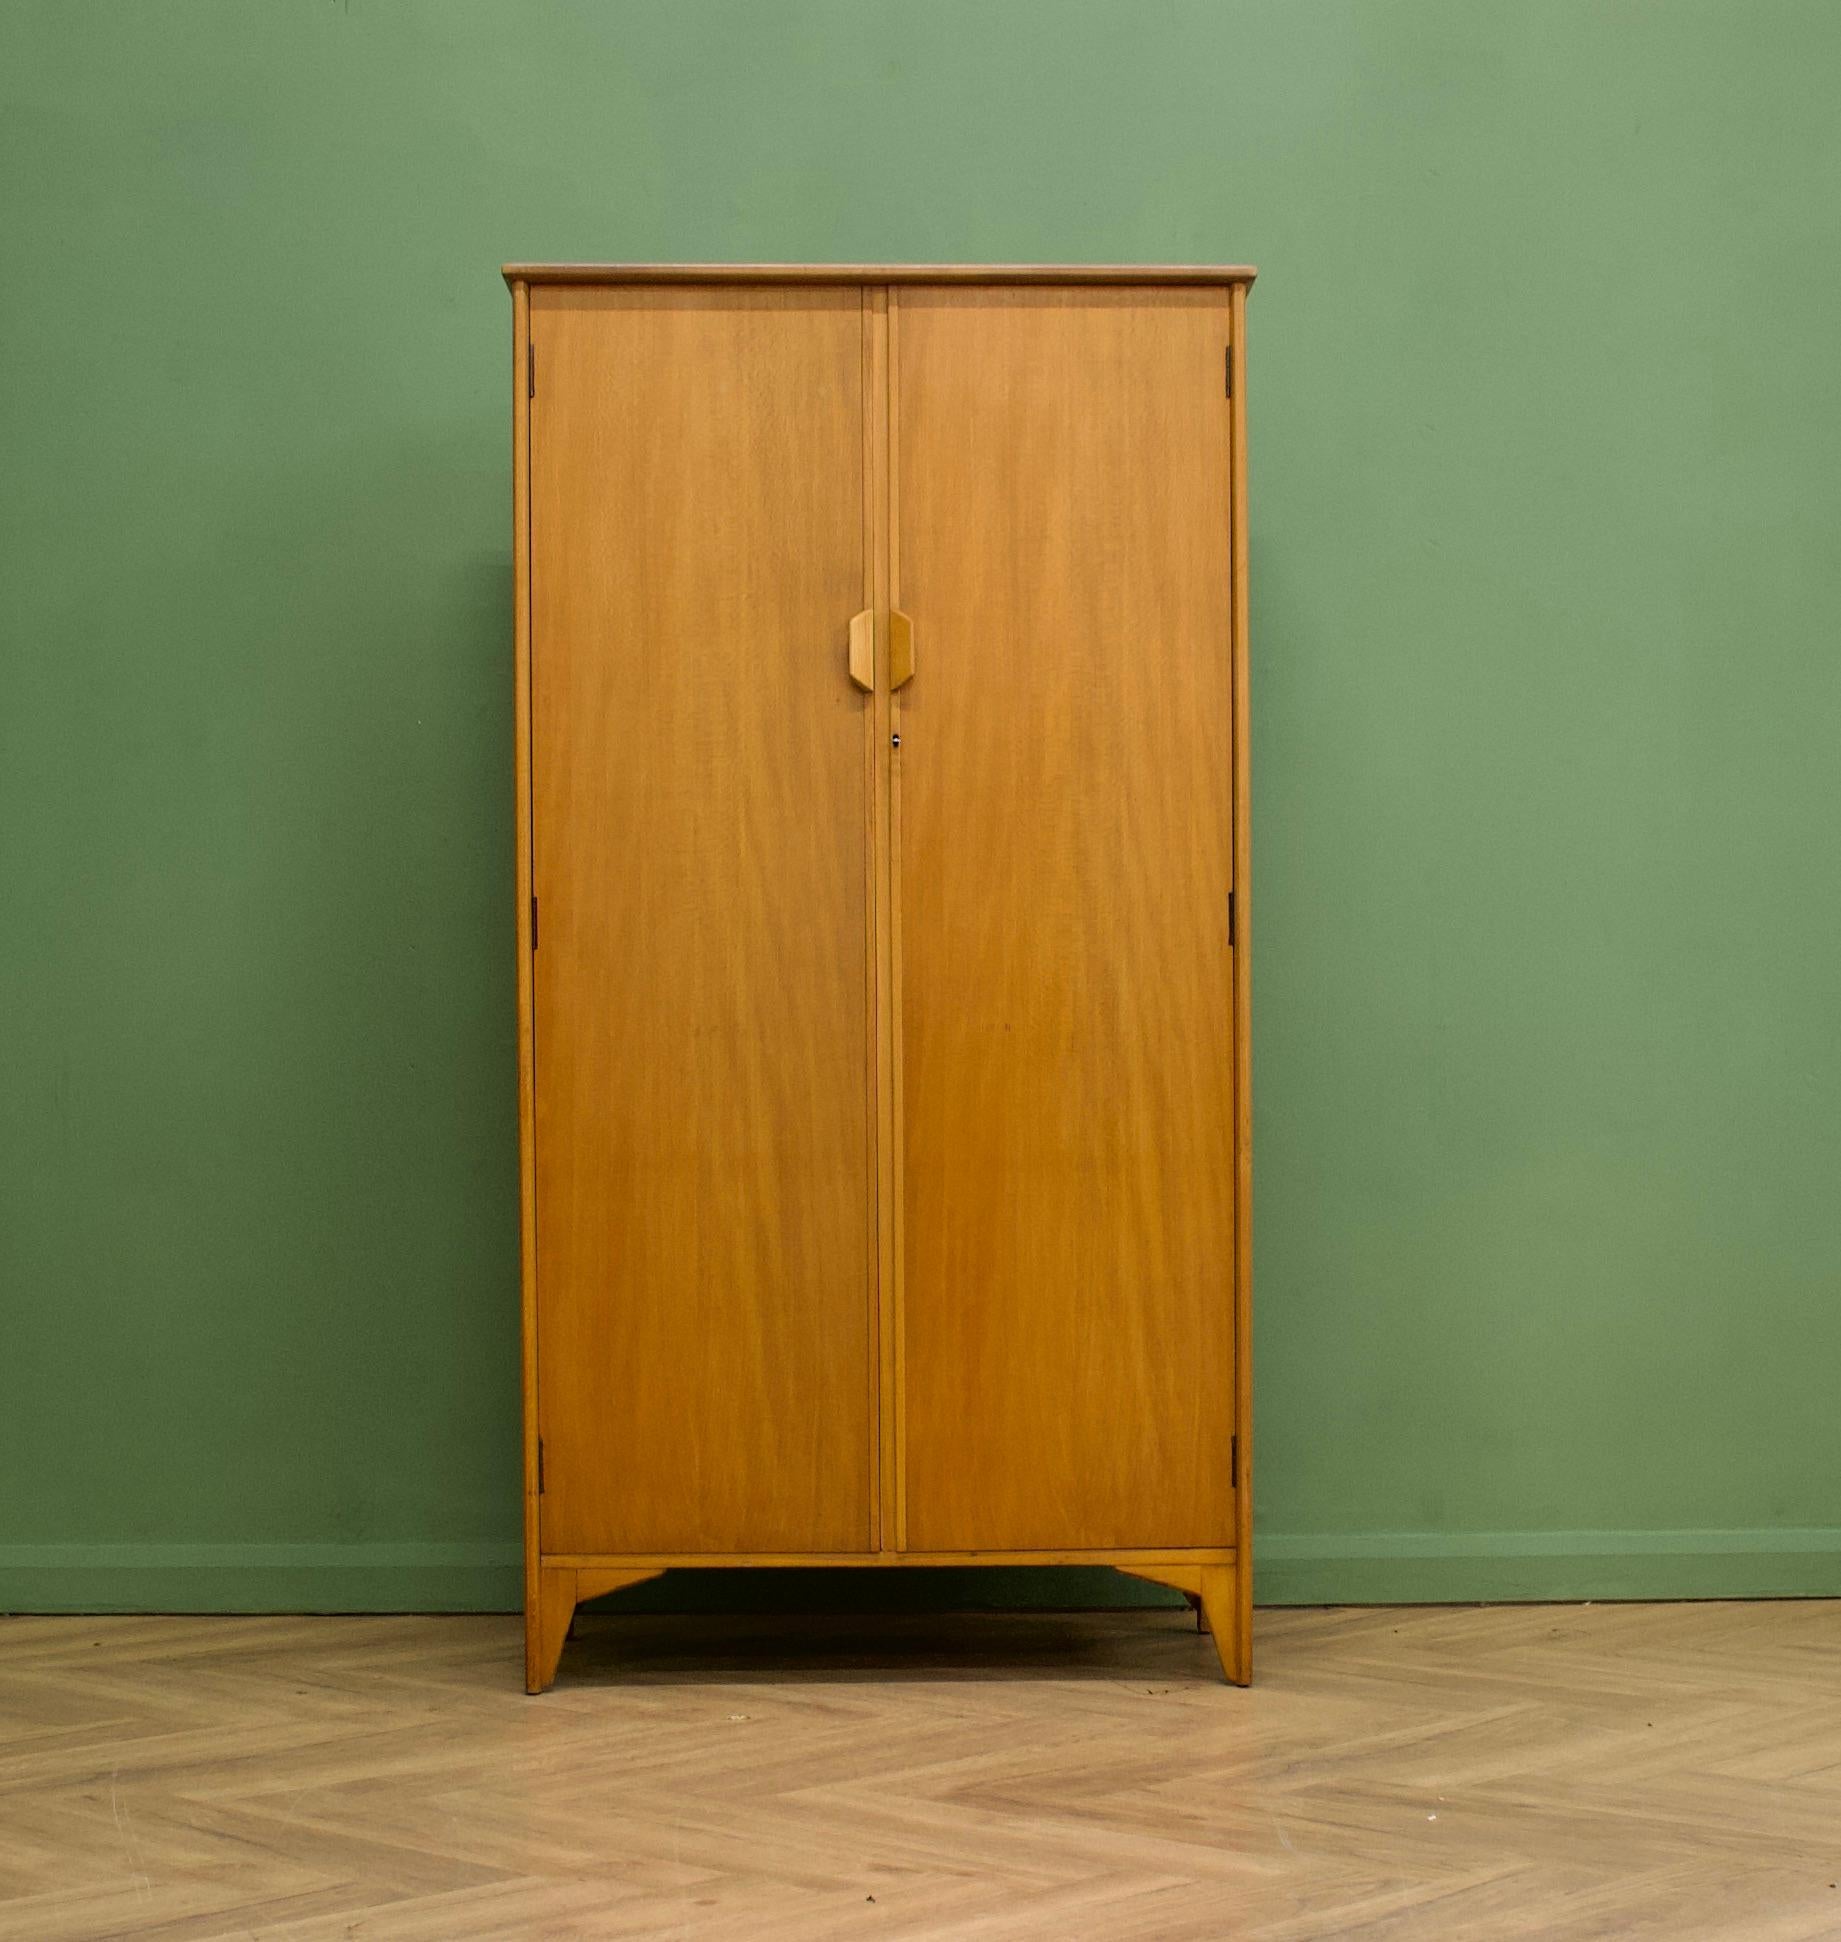 A rare vintage beech wardrobe, designed by Christopher Heal for Heals furniture store - 1951


A minimalist and modernist design - heavily influenced by the Scandinavian style of the time
Featuring a rail the full width and an internal full length